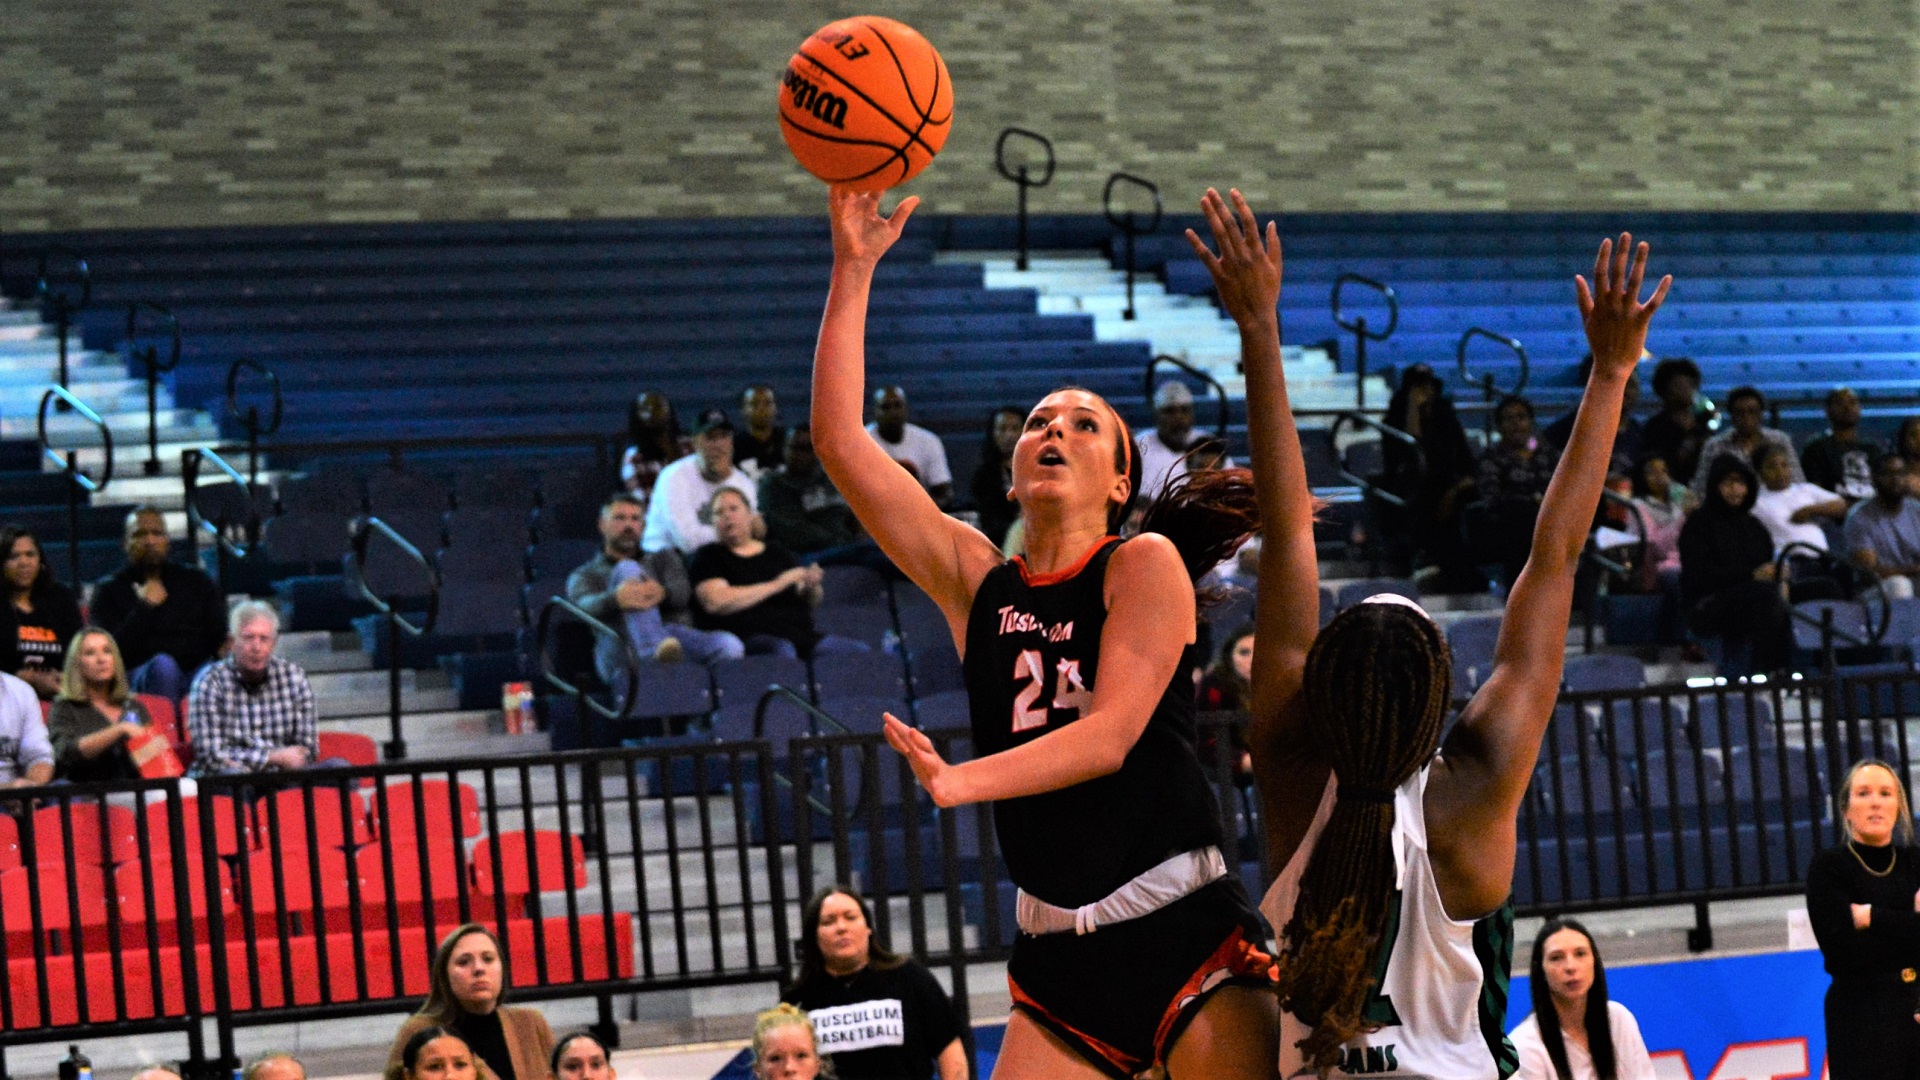 Blayre Shultz scored 18 points in her Pioneer debut against Mount Olive (photo by Mike Slade)